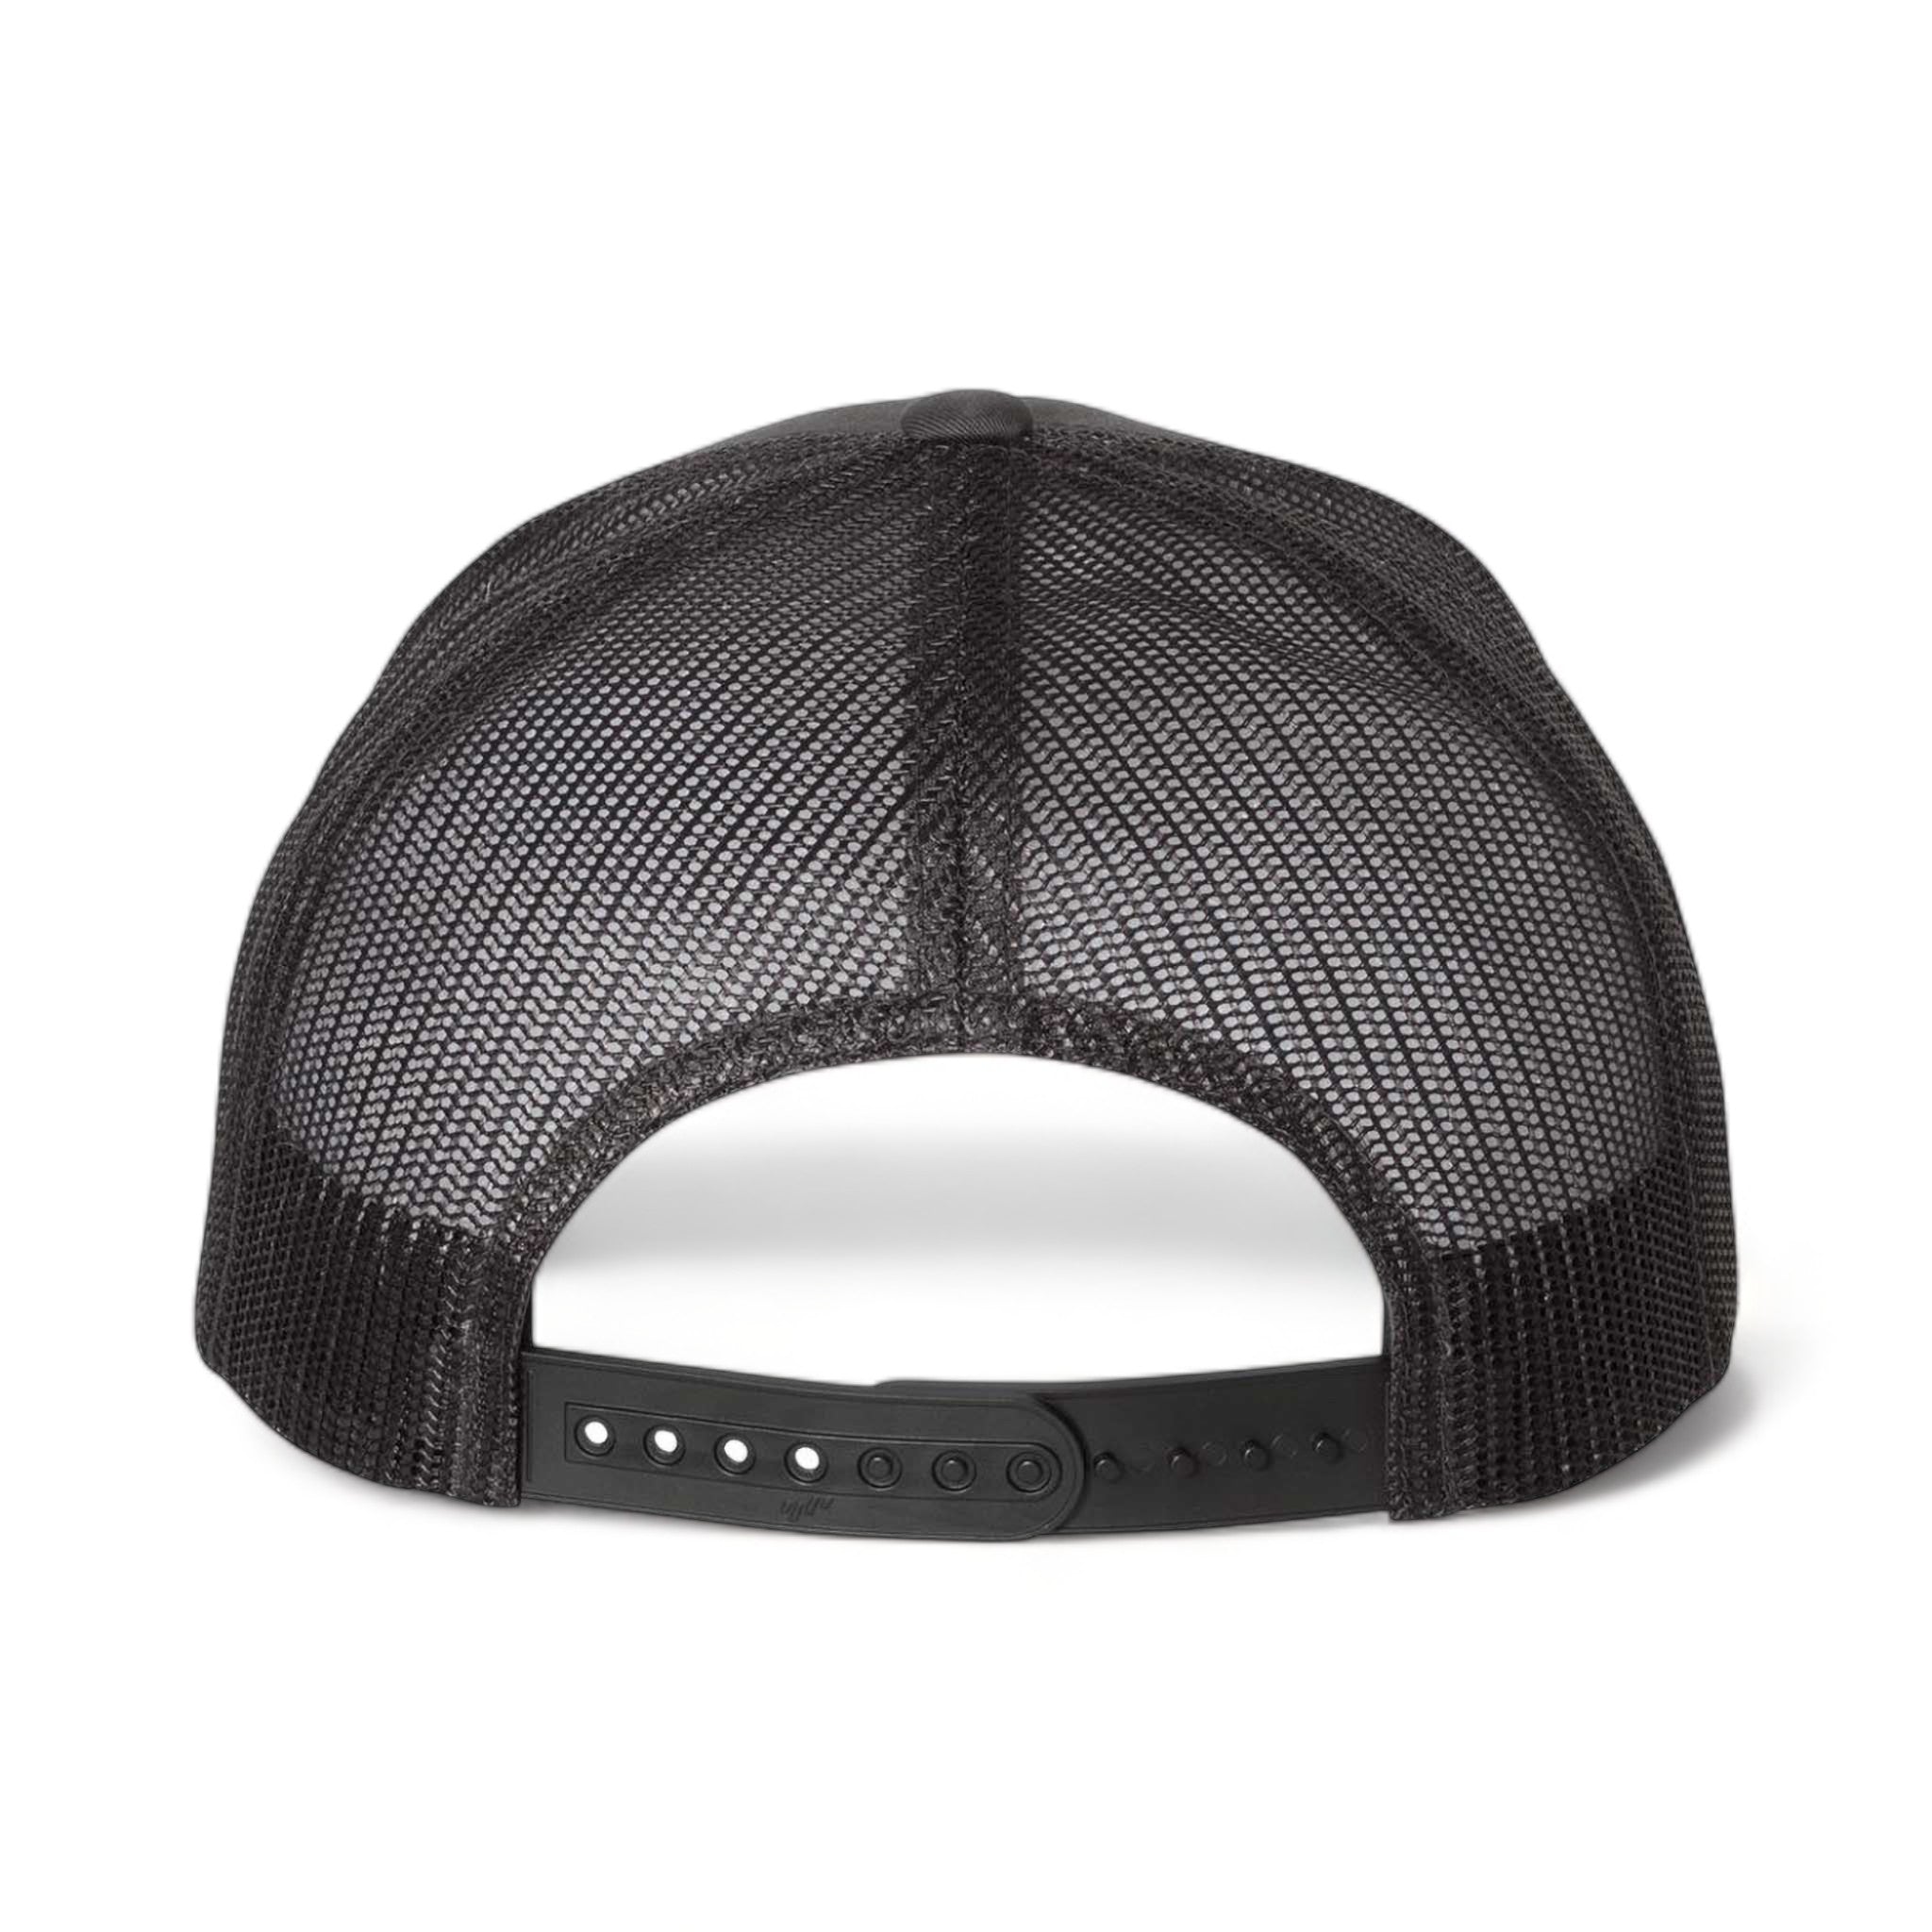 Back view of YP Classics 6606 custom hat in charcoal and black